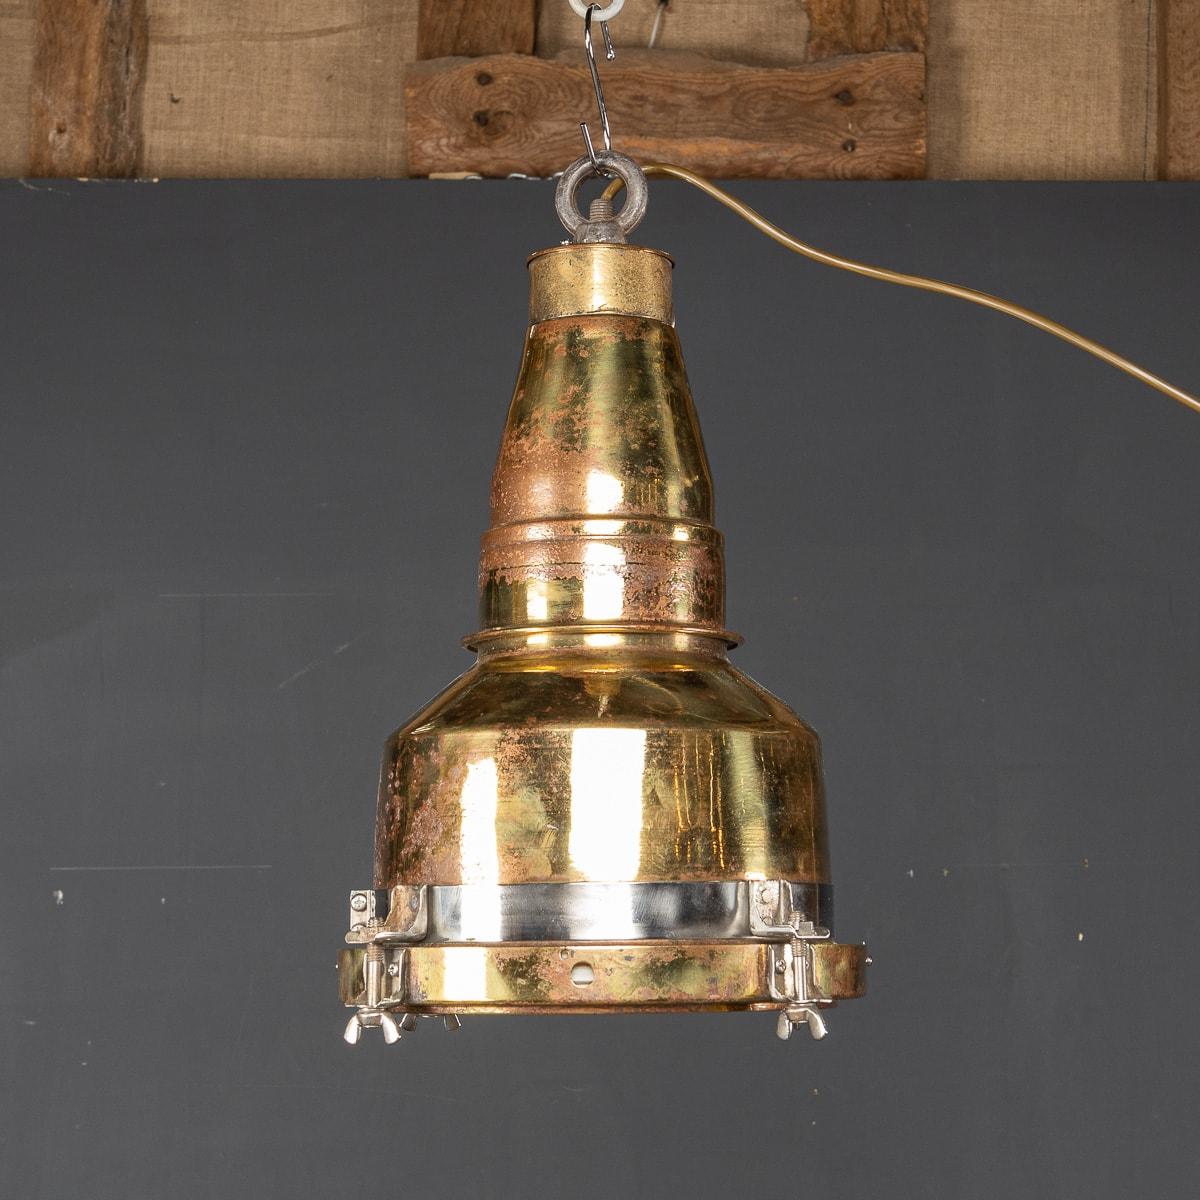 A fabulous brass light that once belonged to a Danish ship that circumnavigated the globe delivering cargo goods. Now, beautifully salvaged and restored to its former glory.

CONDITION
In Good Condition. (please refer to